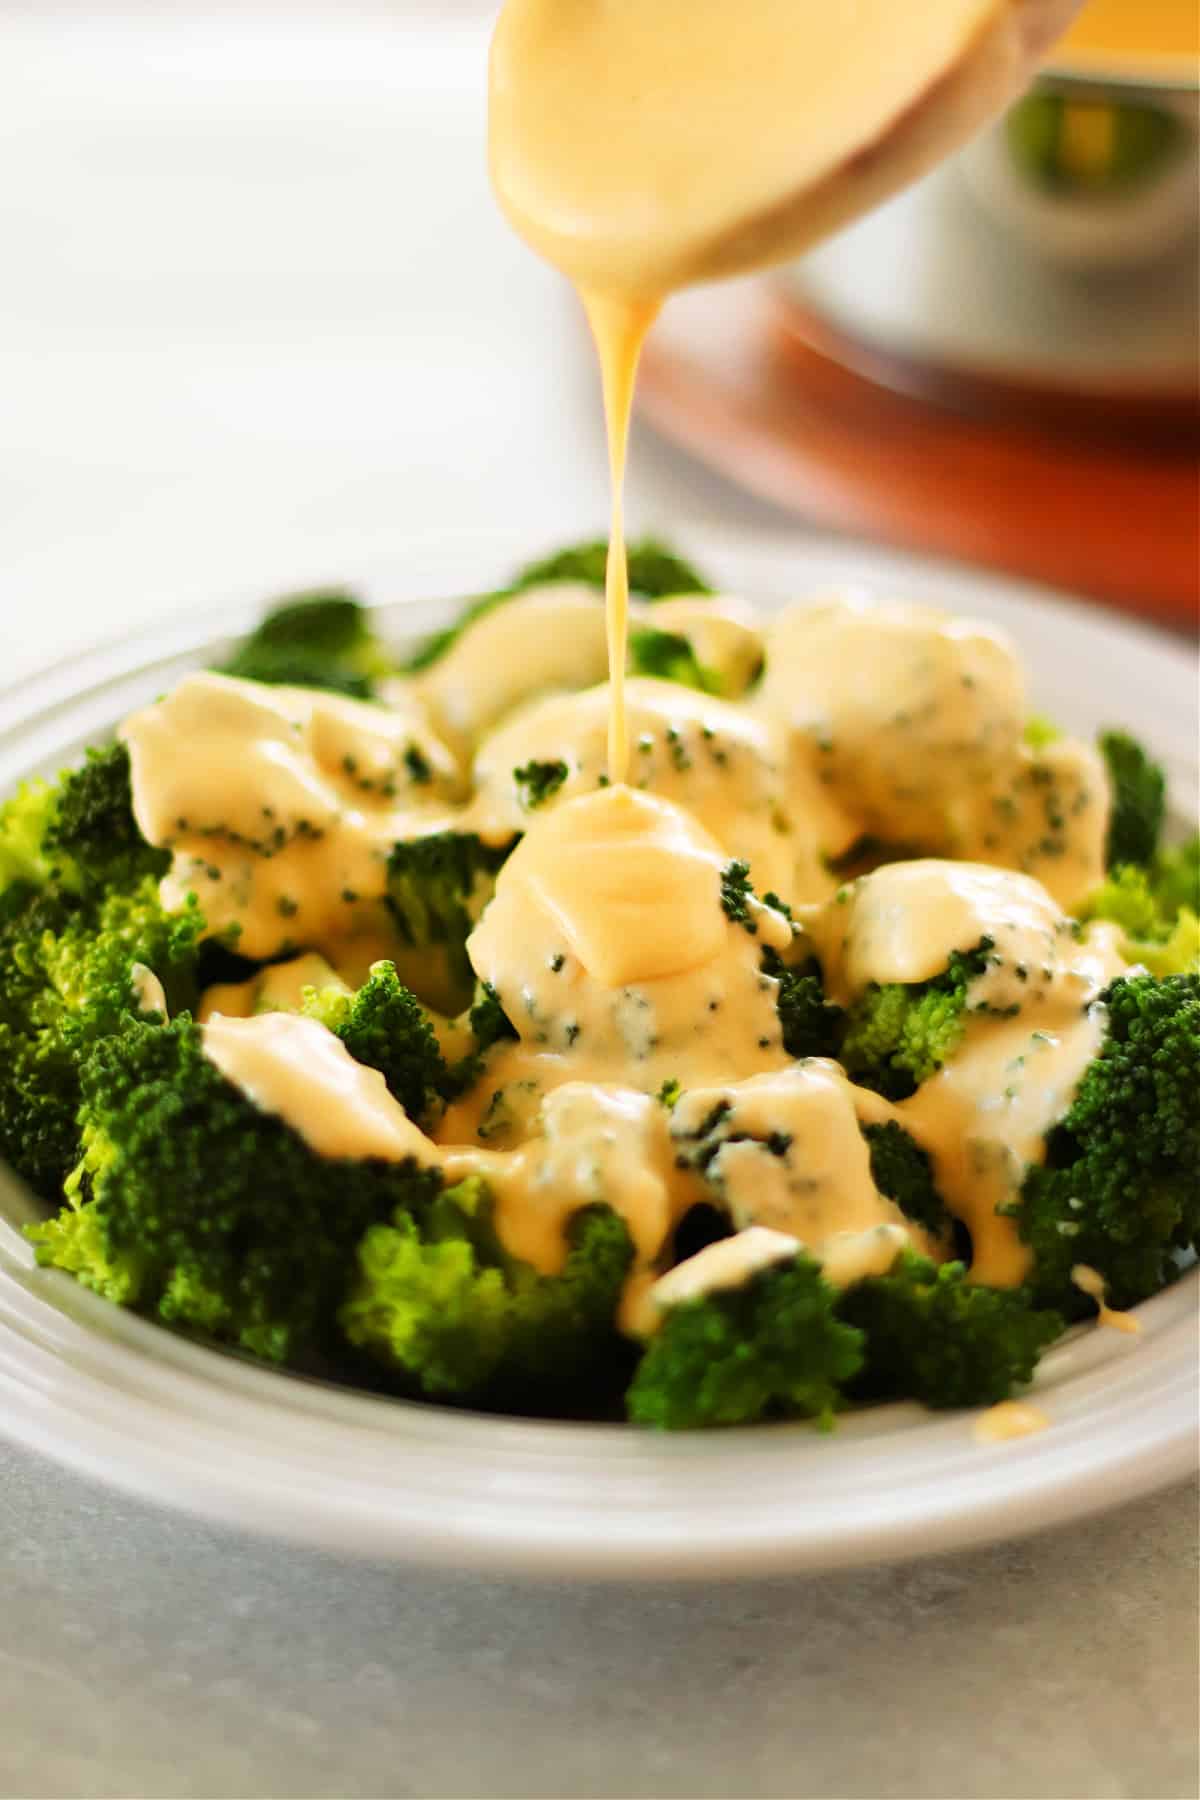 Cheddar cheese sauce drizzled over cooked broccoli in a bowl.